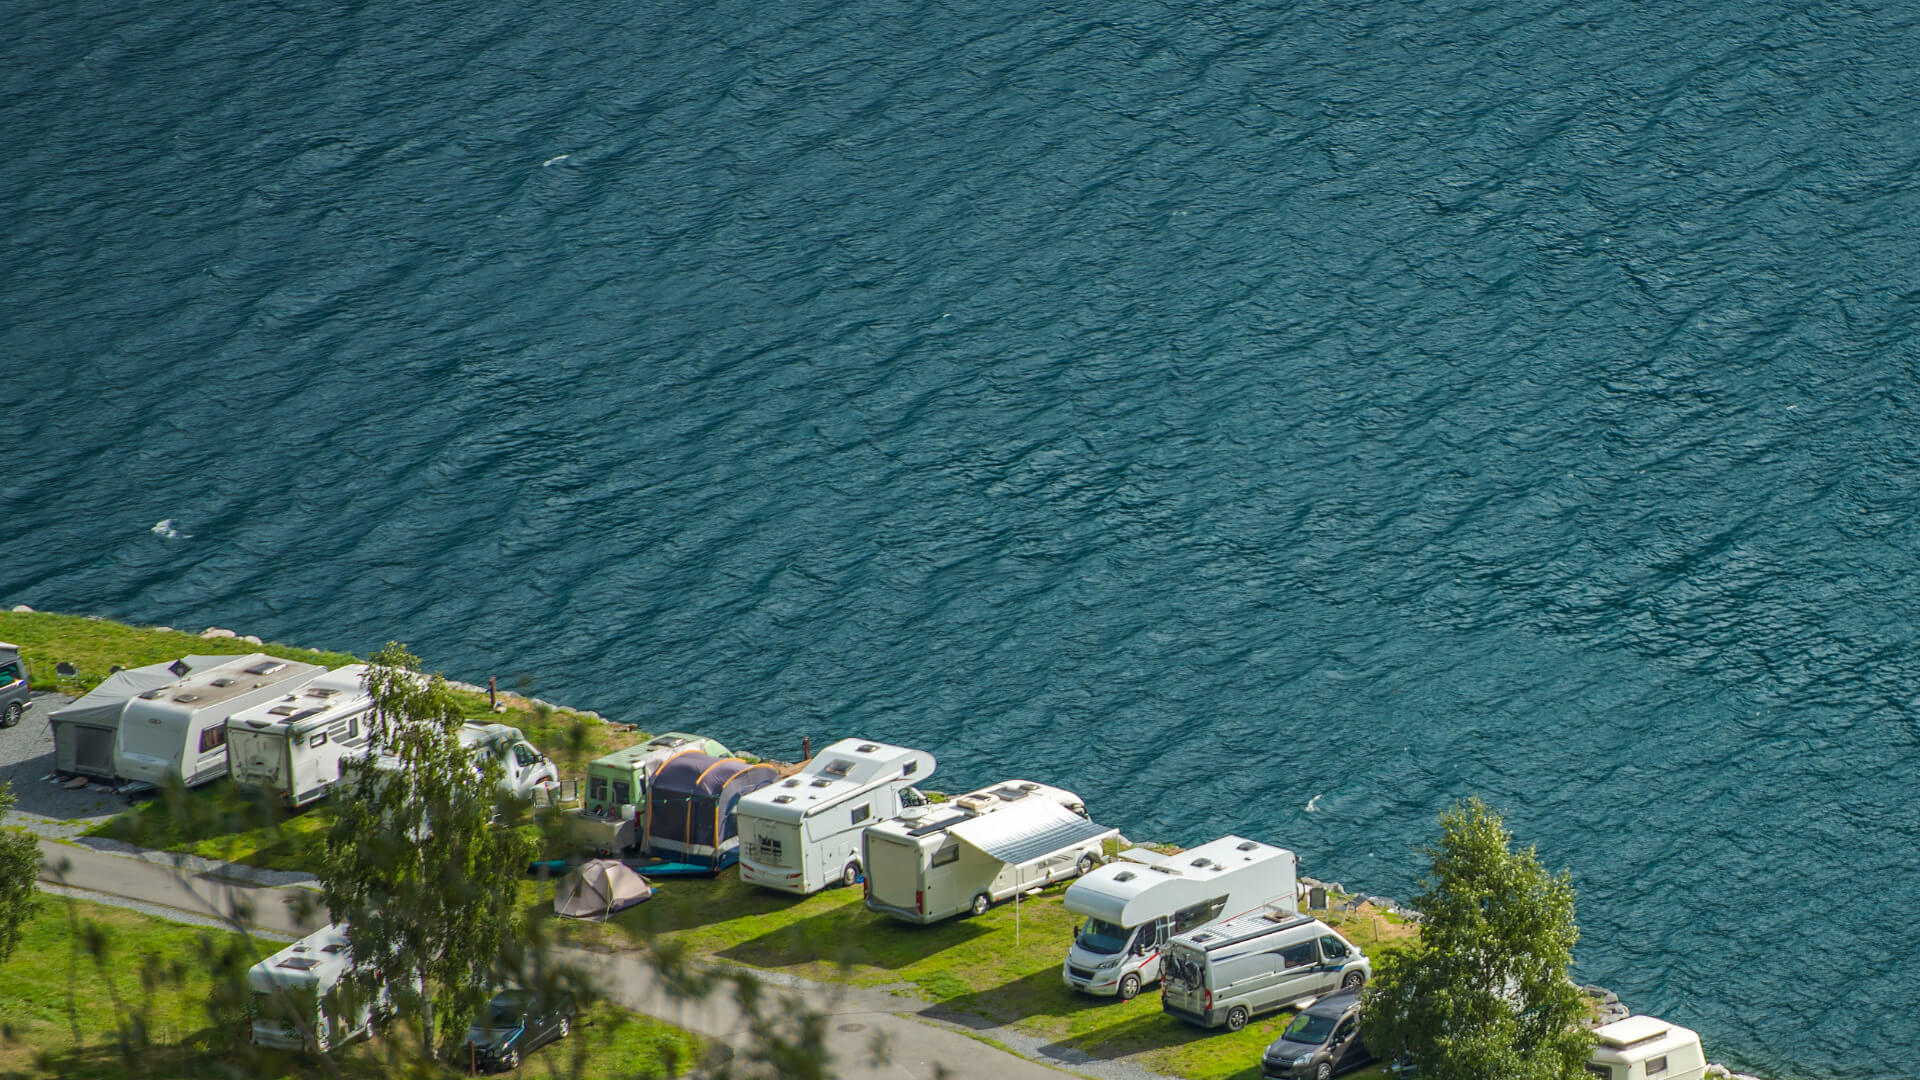 How Much Do RV Parks Cost on Average? - Getaway Couple